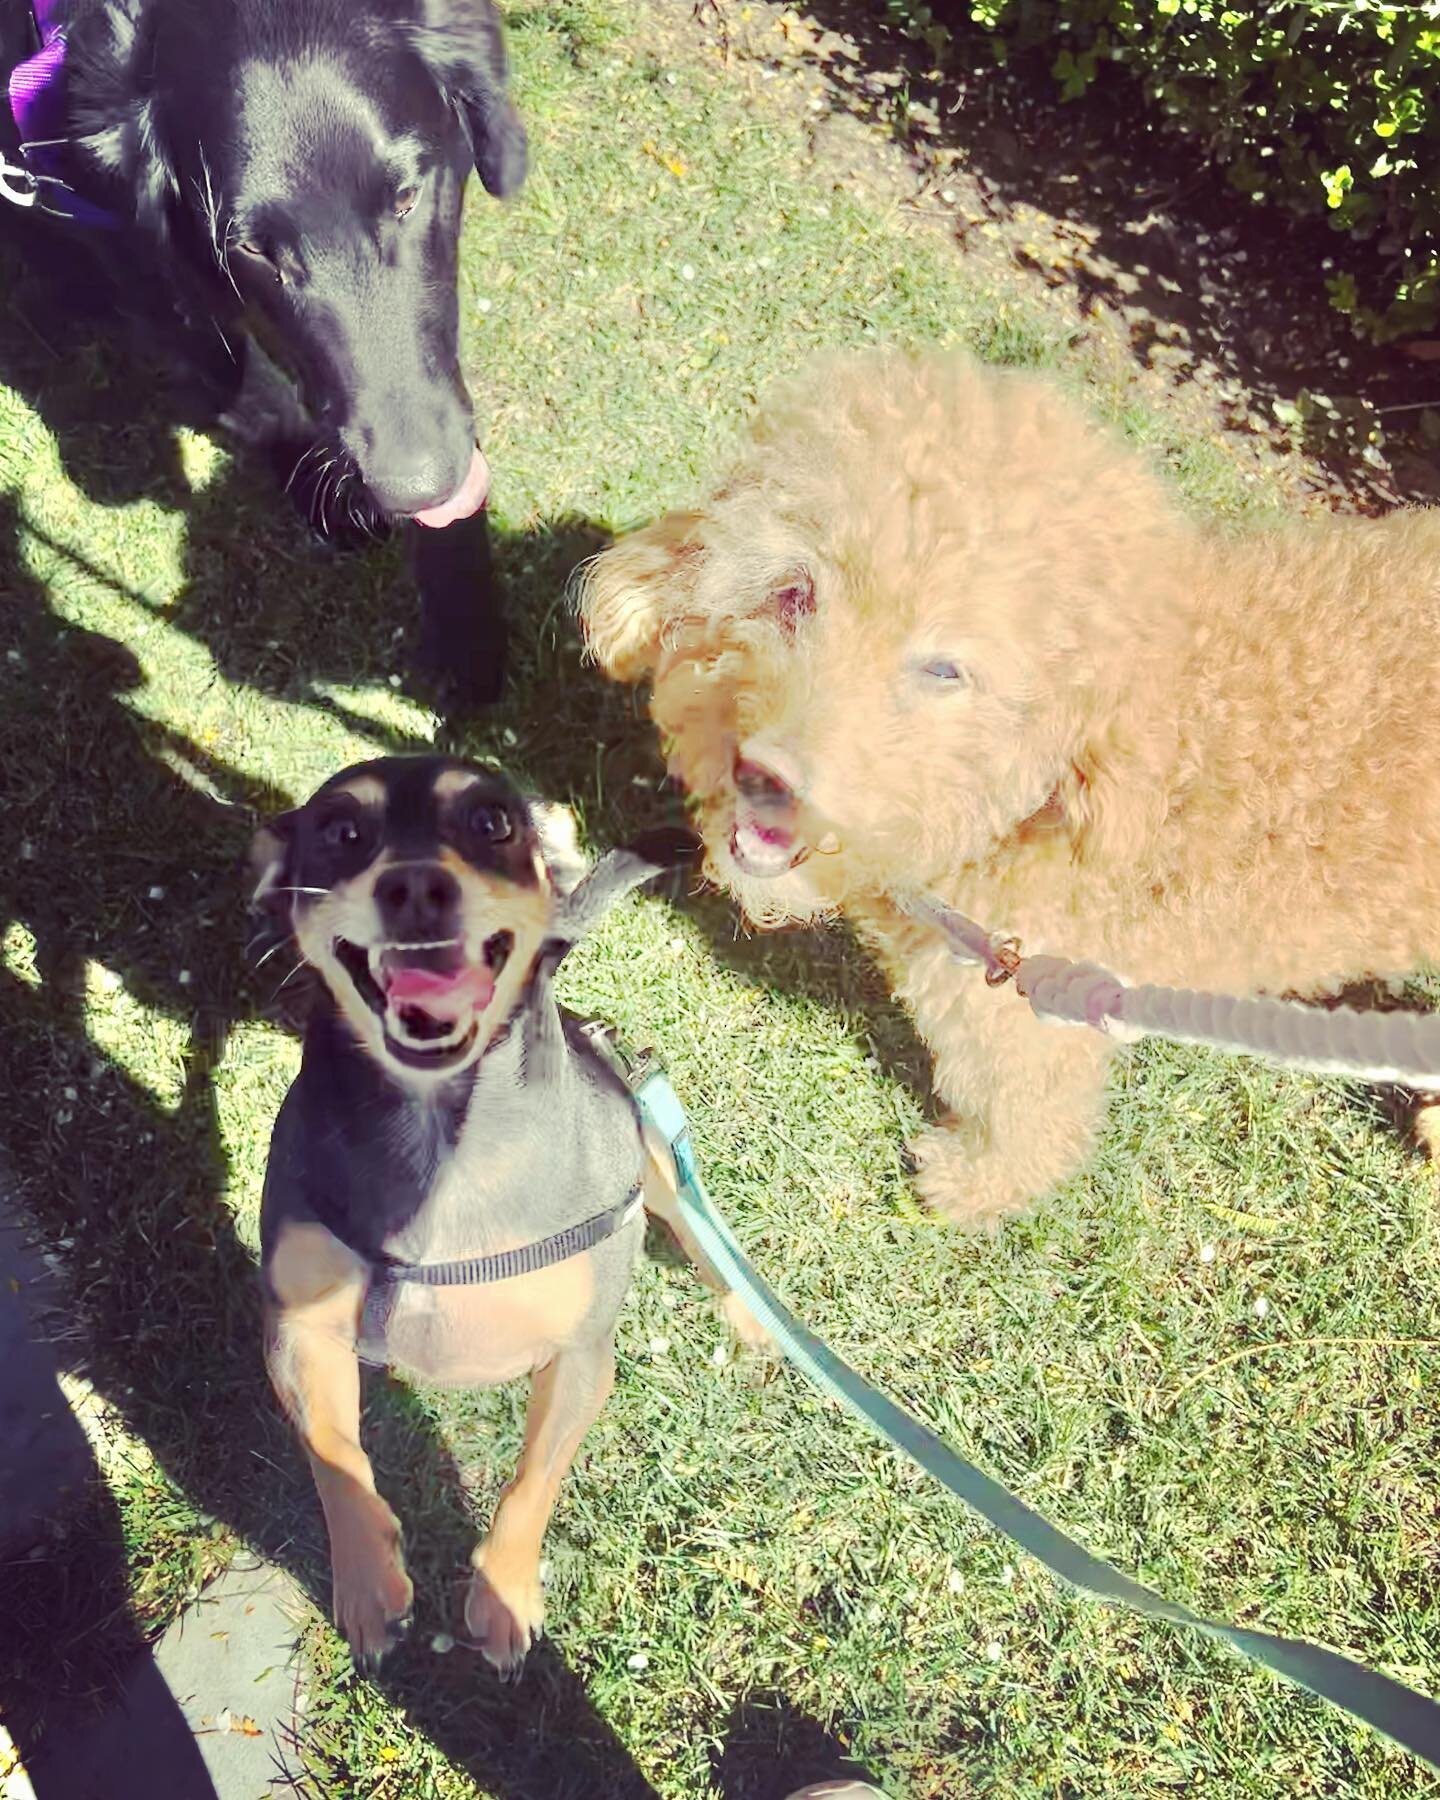 Major shouts out to Lil Johnny!!! He is such a HOOT and LOVES rollin with the big boys!!! Not only does he love his pack walks, but he is always pack leader 😂. And sometimes he even walks underneath the big dogs to get the extra good sniffs 😭. We c